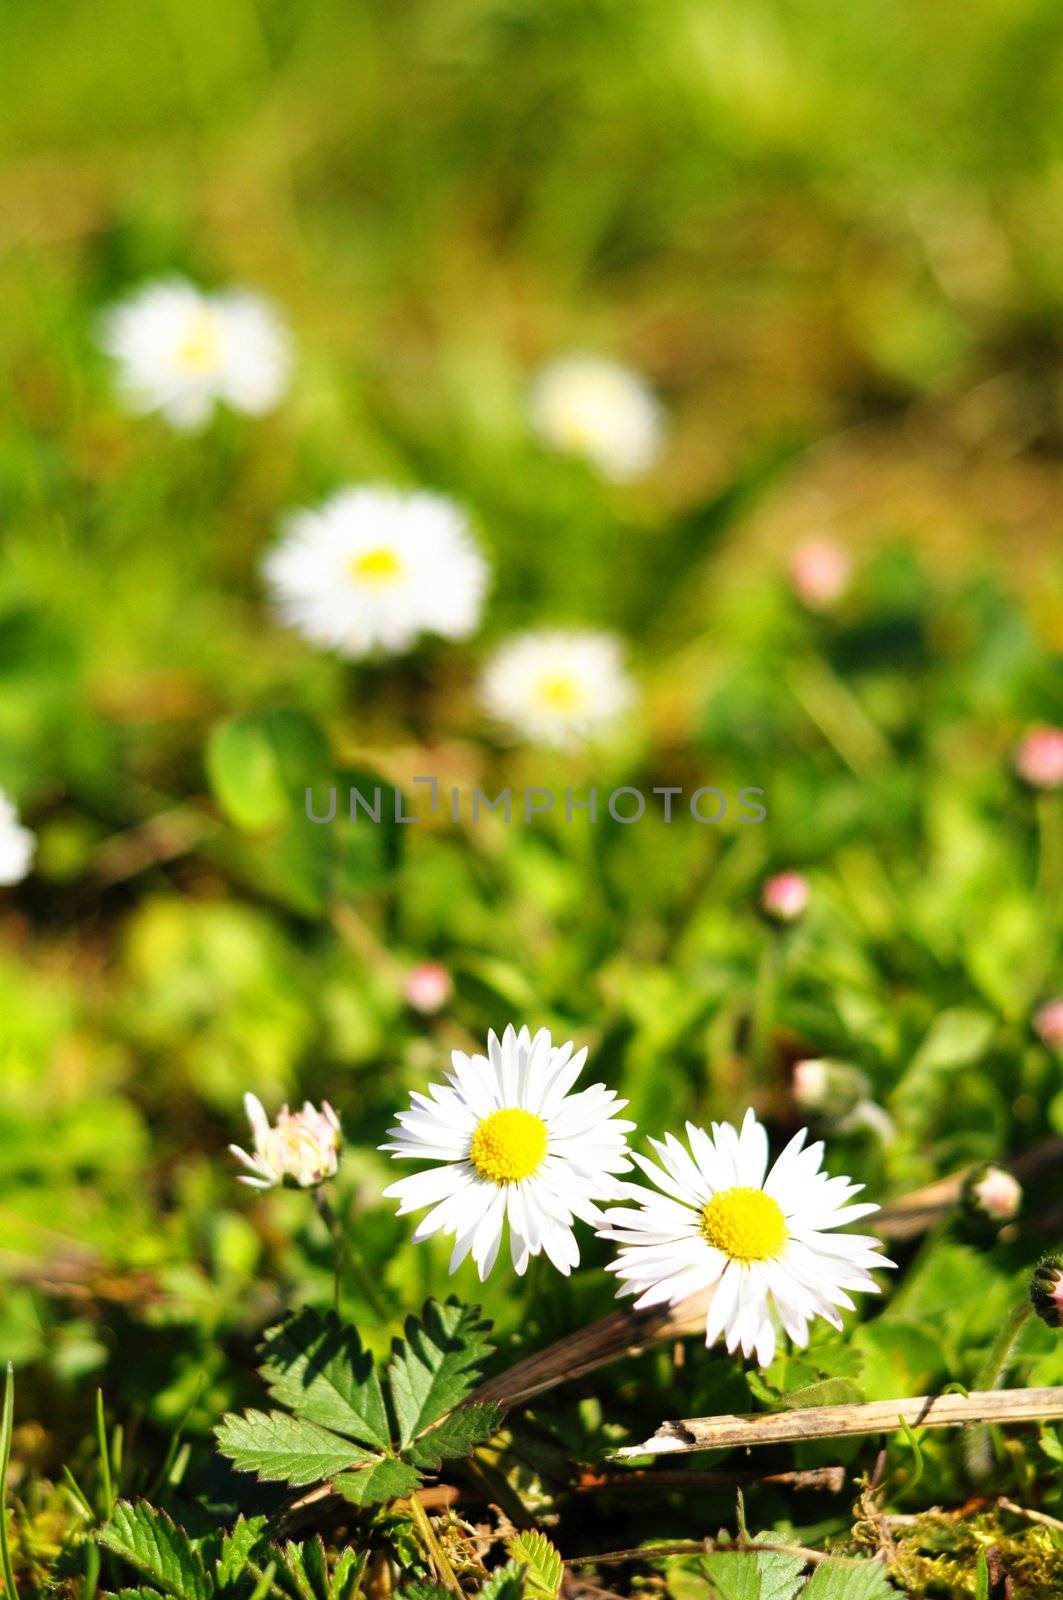 daisy flower in summer in green grass with copyspace